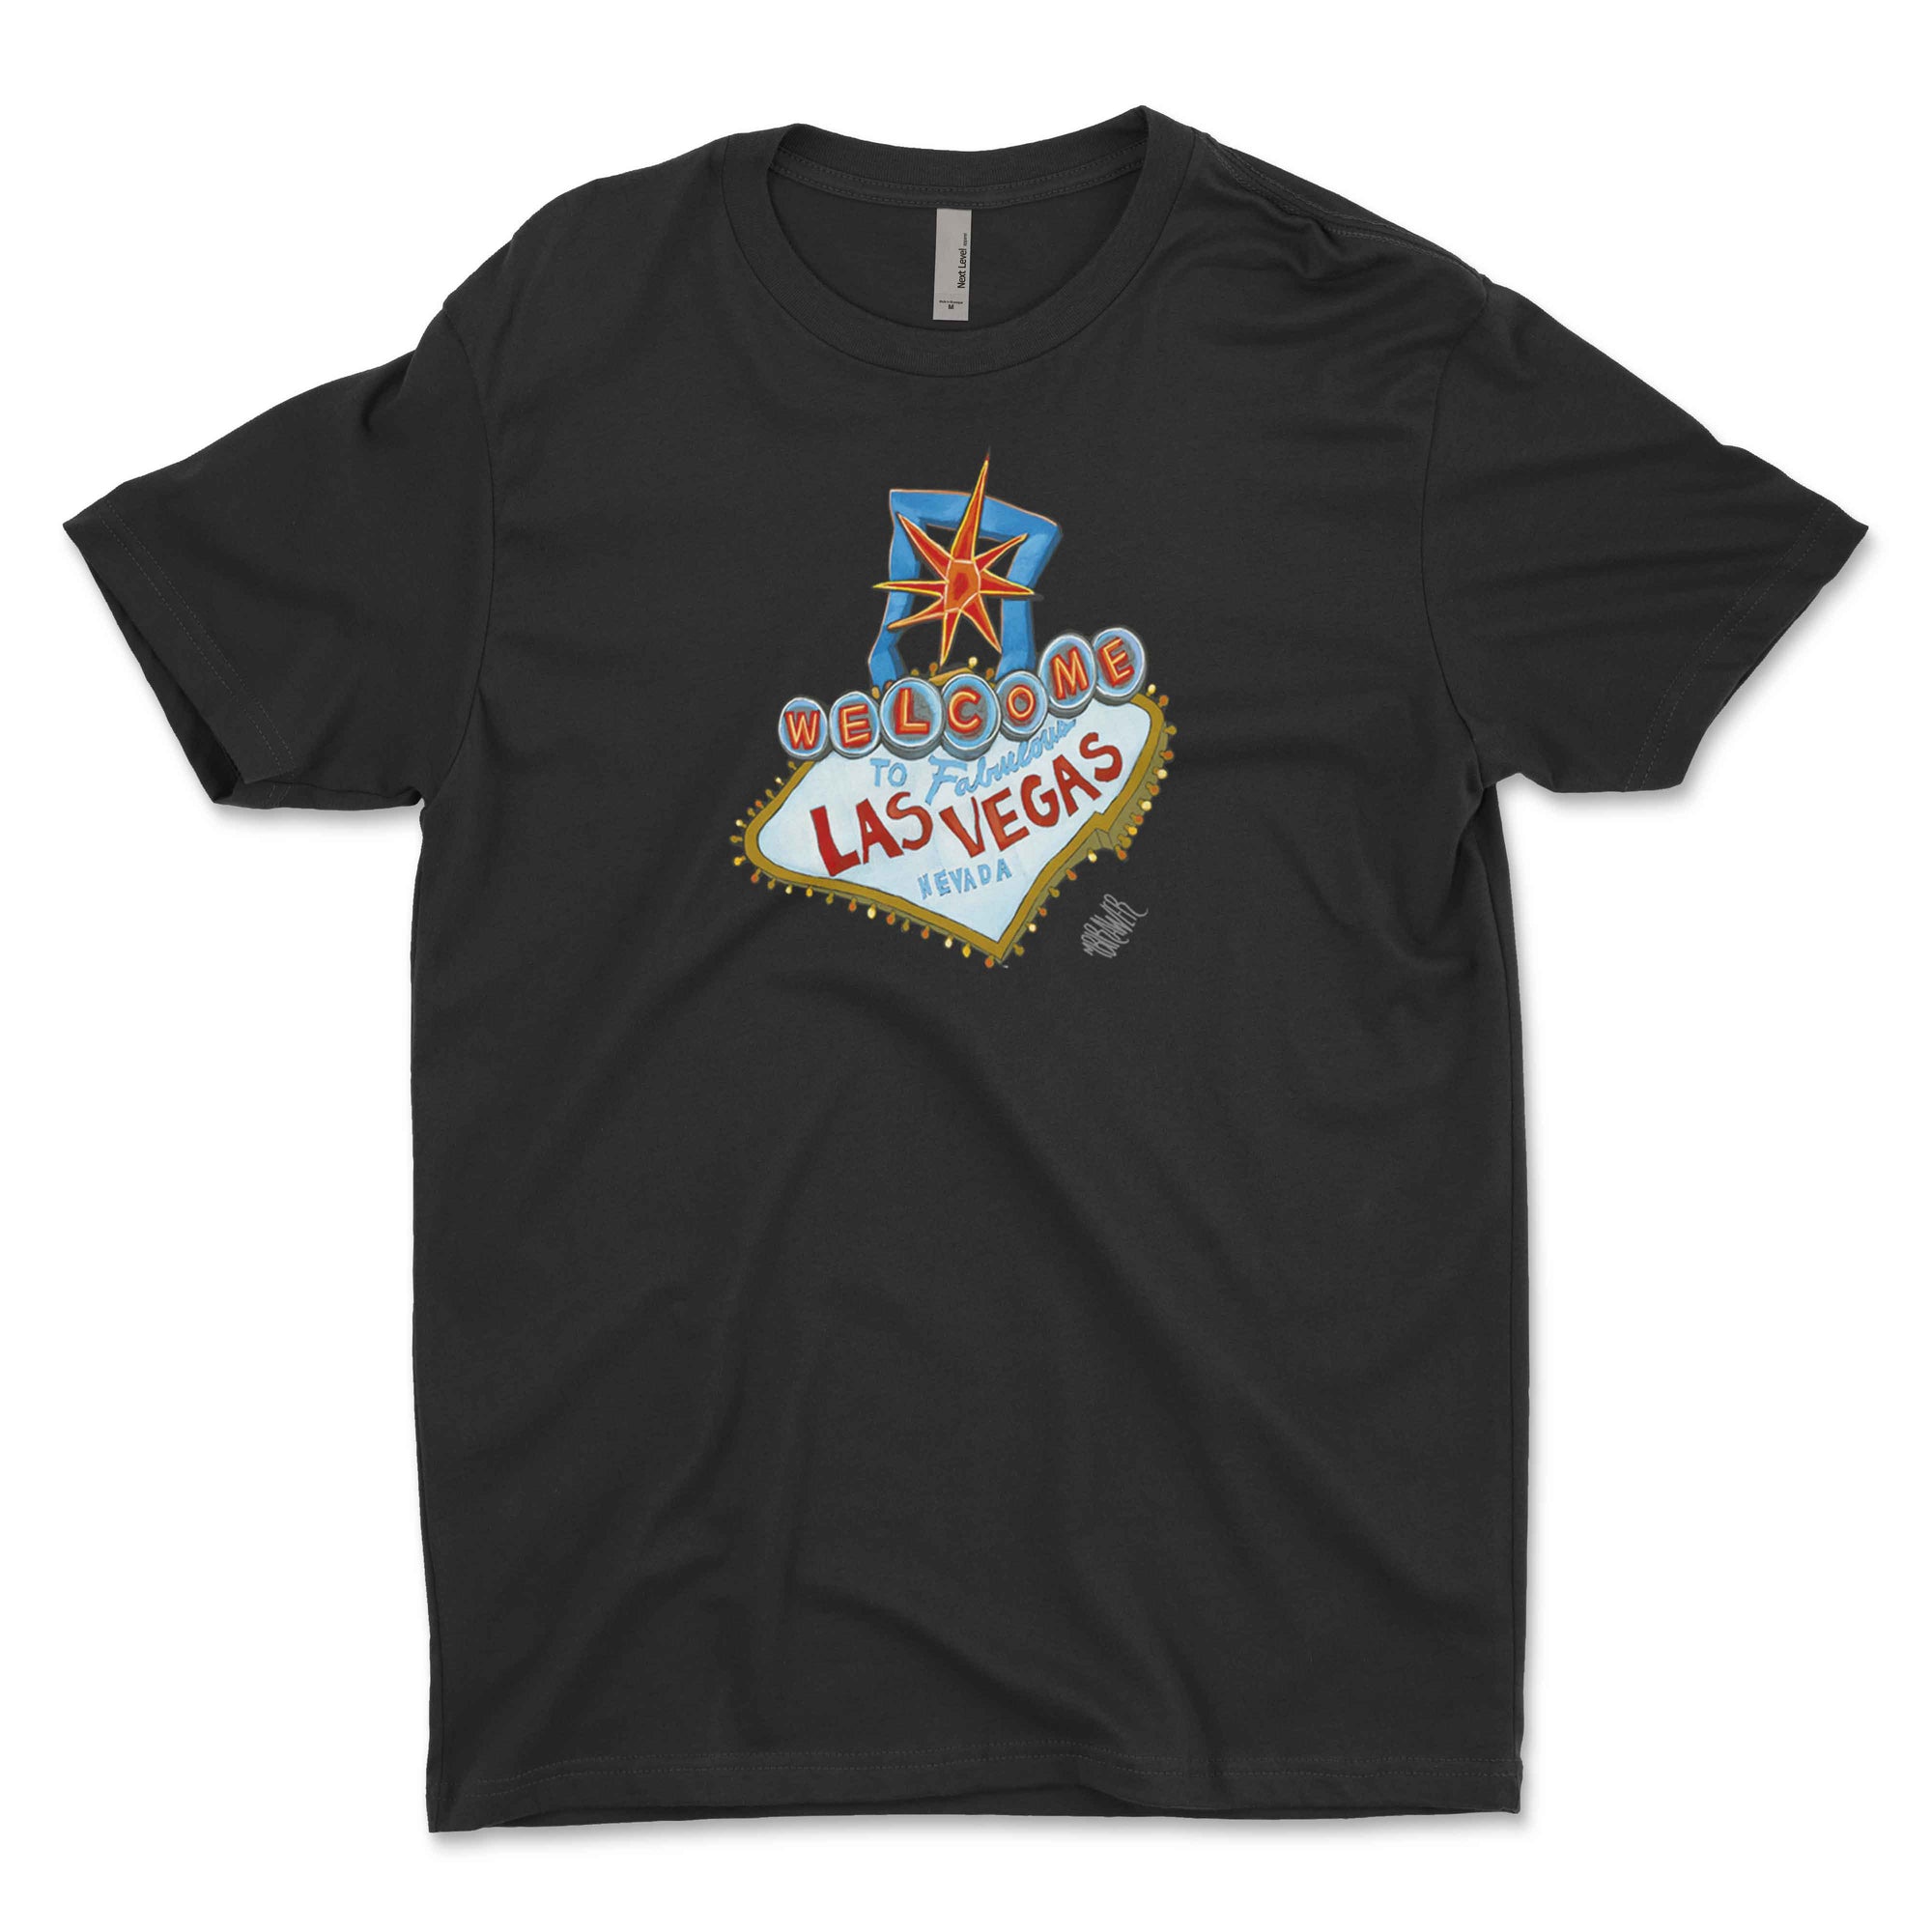 "Welcome to Las Vegas" Unisex T-Shirt